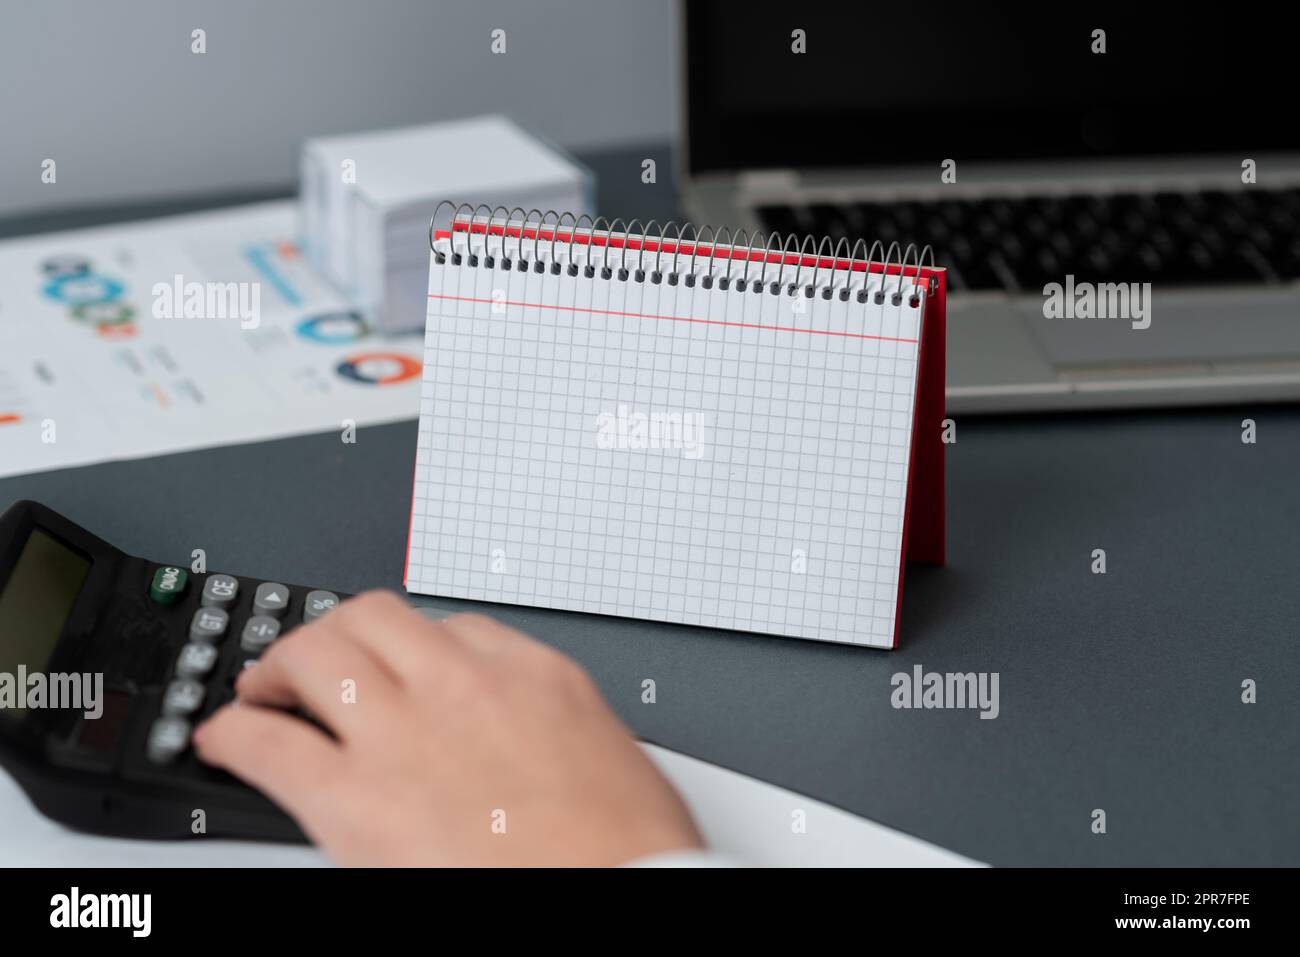 Blank Opened Spiral Notebook With A Calculator And A Pen Placed Over A Table. Empty Lined Notepad And Pencil On Top Of A Desk With A Calculation Device. Stock Photo